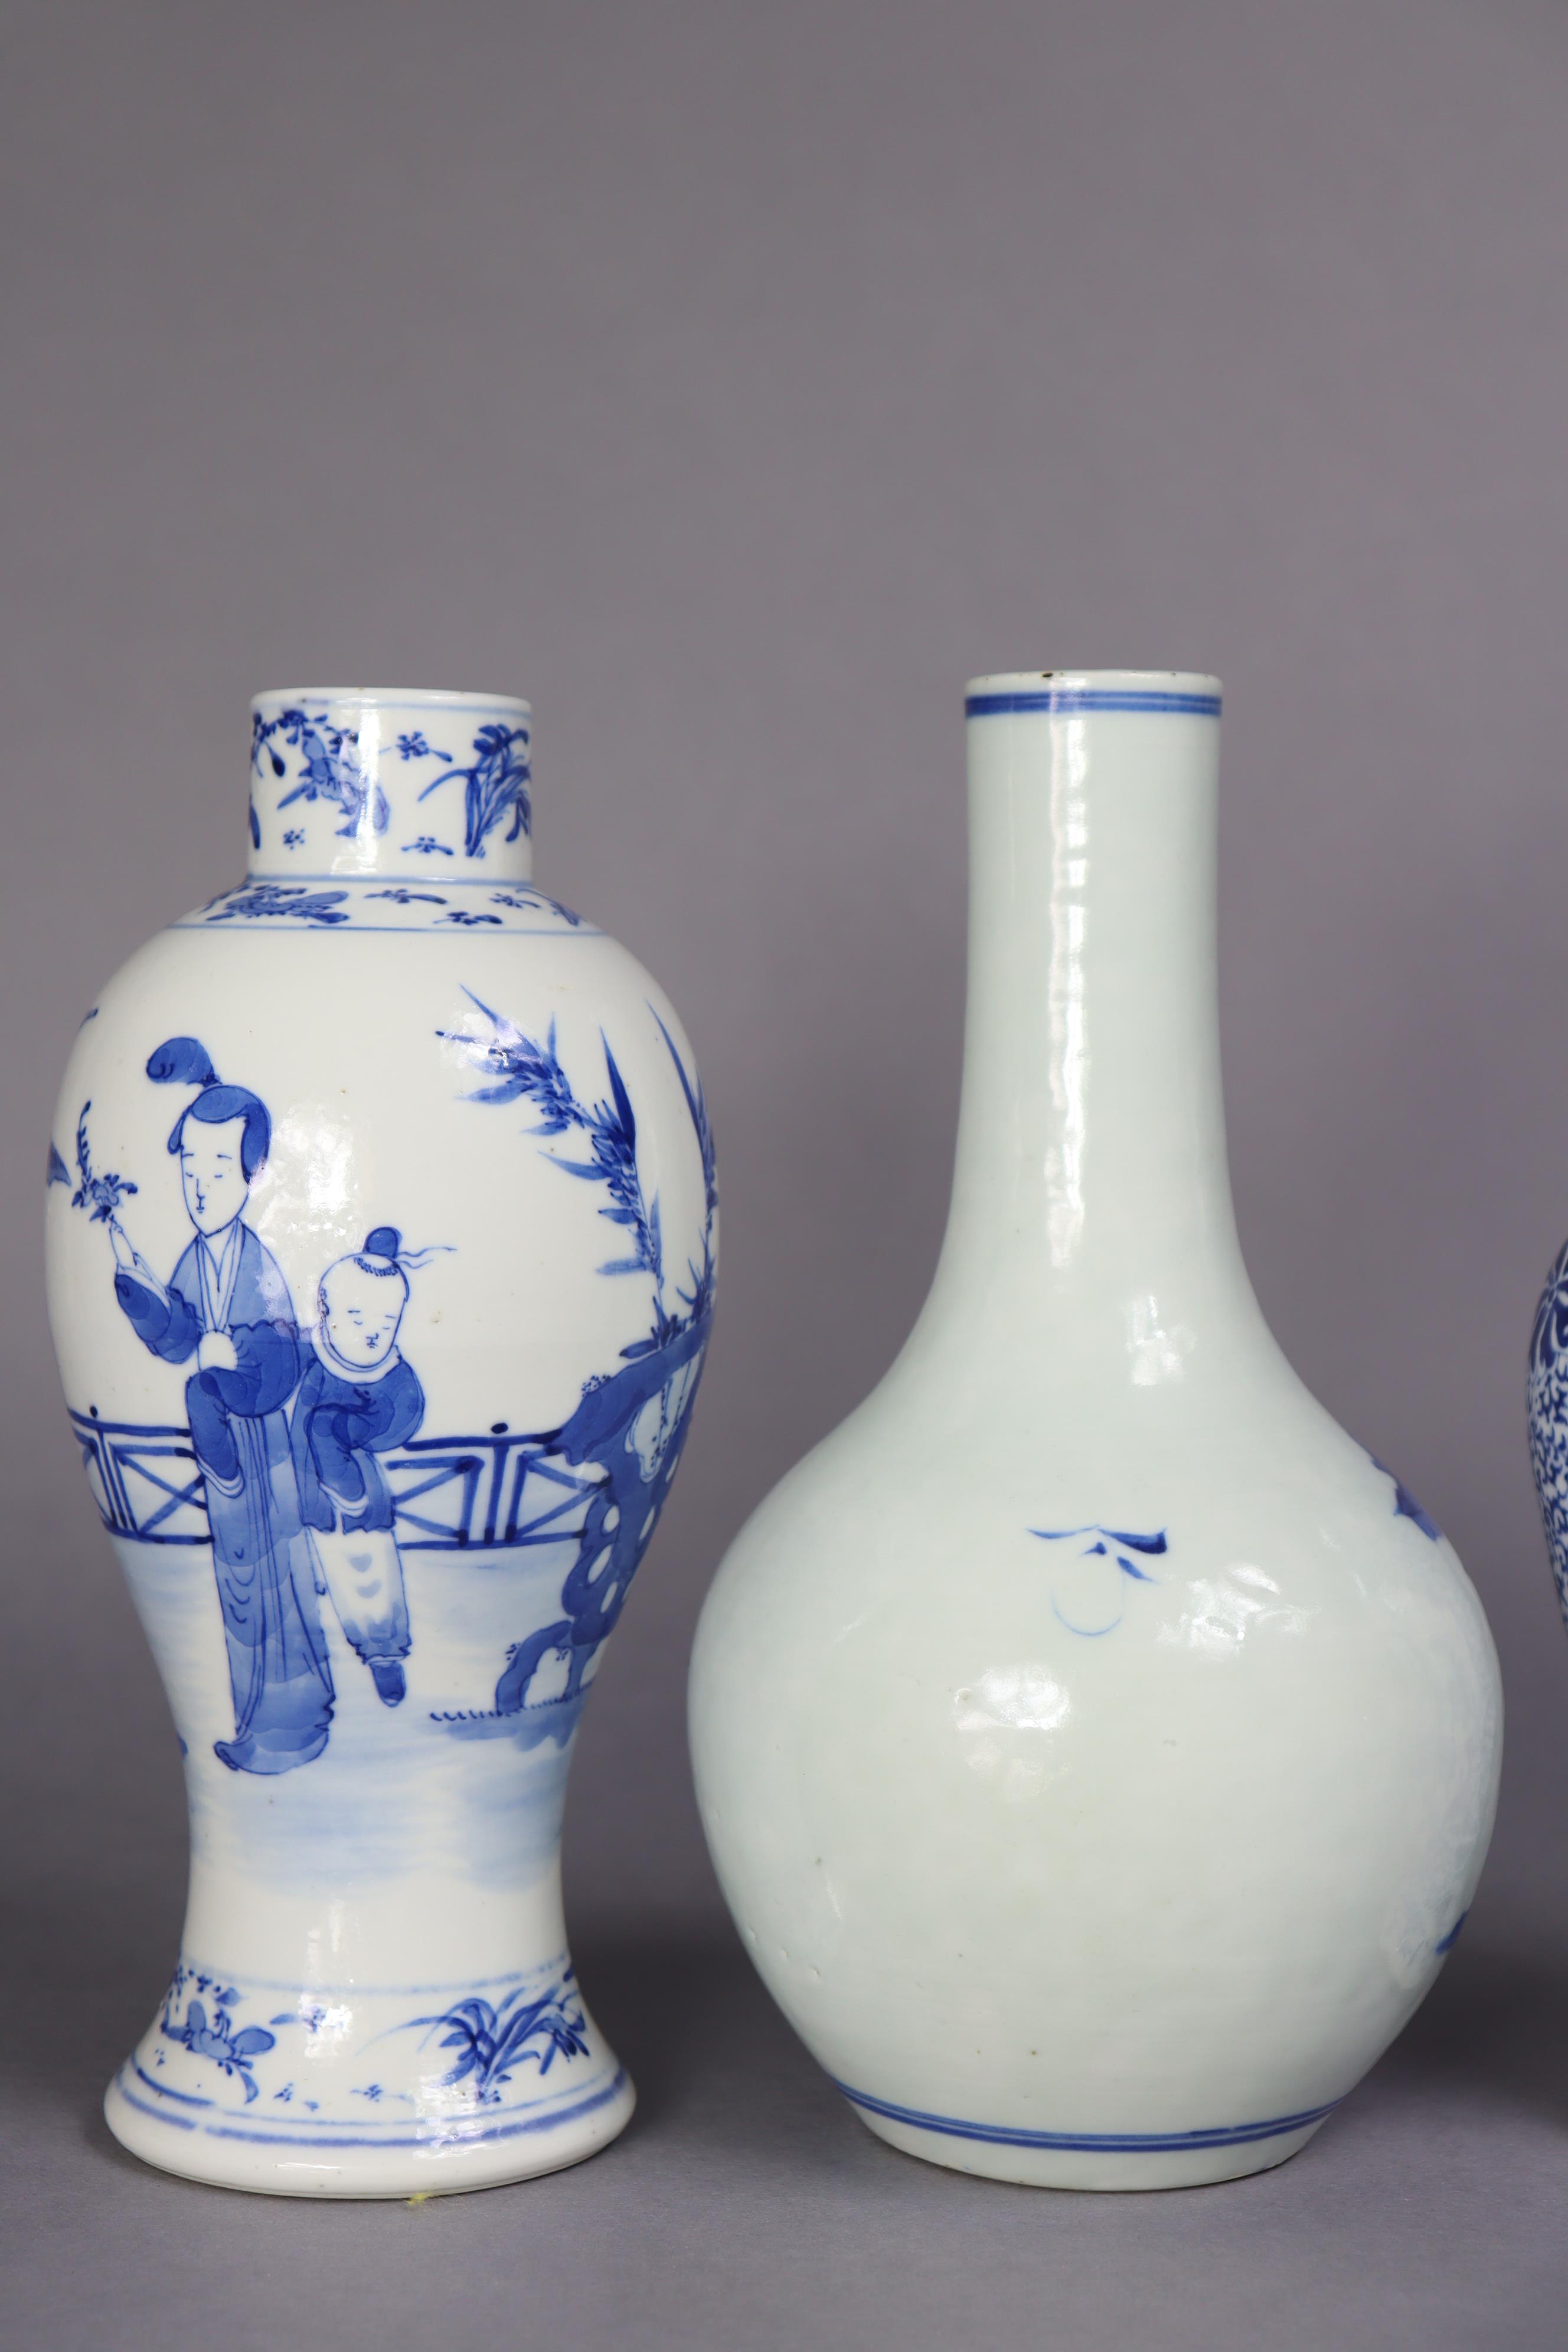 A 19th century Chinese blue & white porcelain bottle vase decorated with fishermen in a - Image 3 of 8